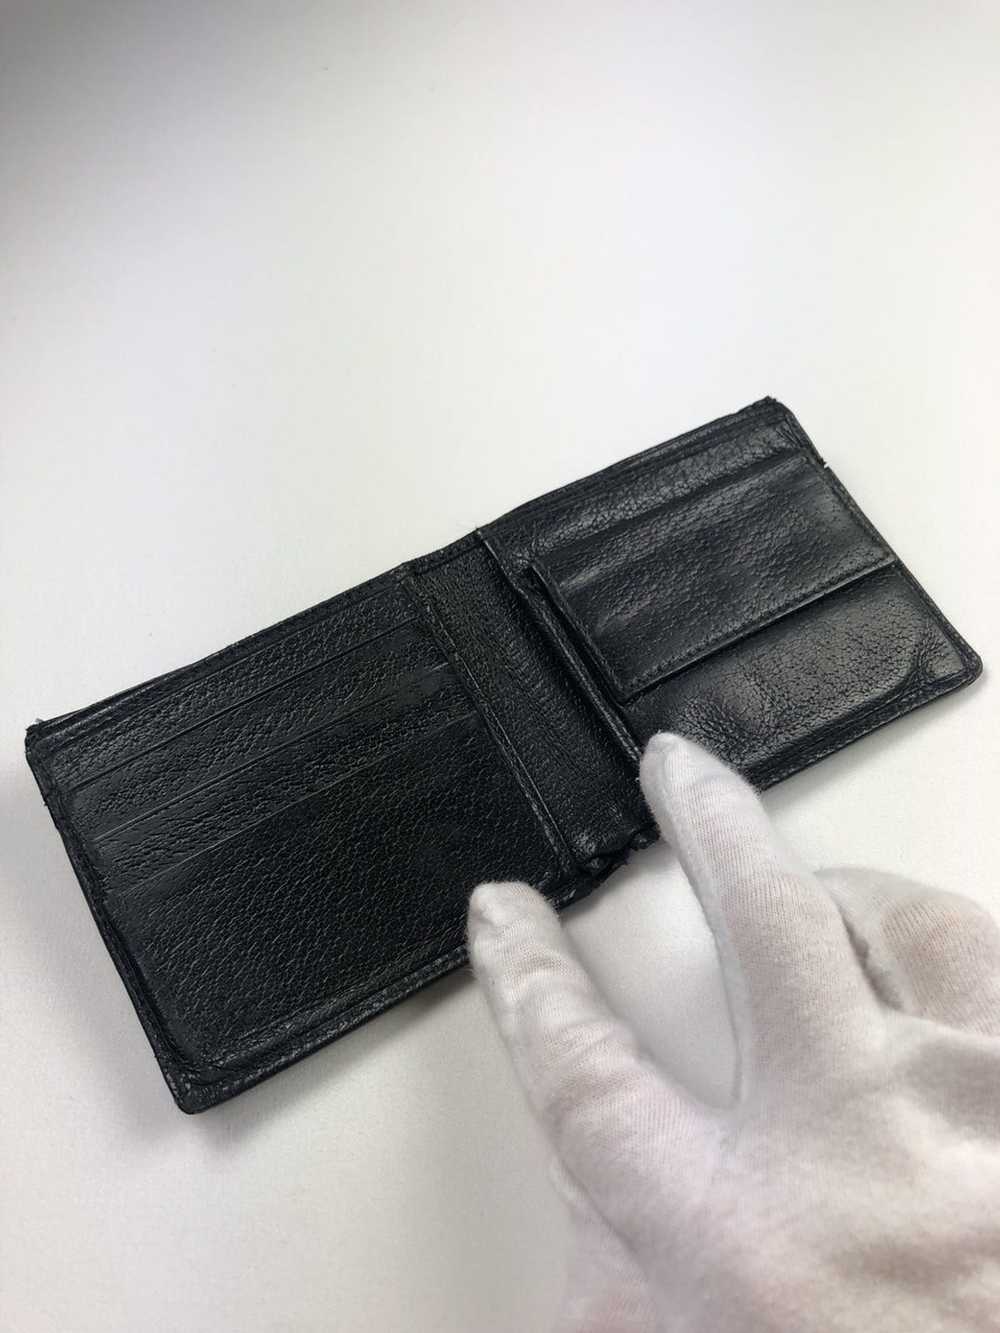 Gucci Gucci crest leather bifold wallet - image 2